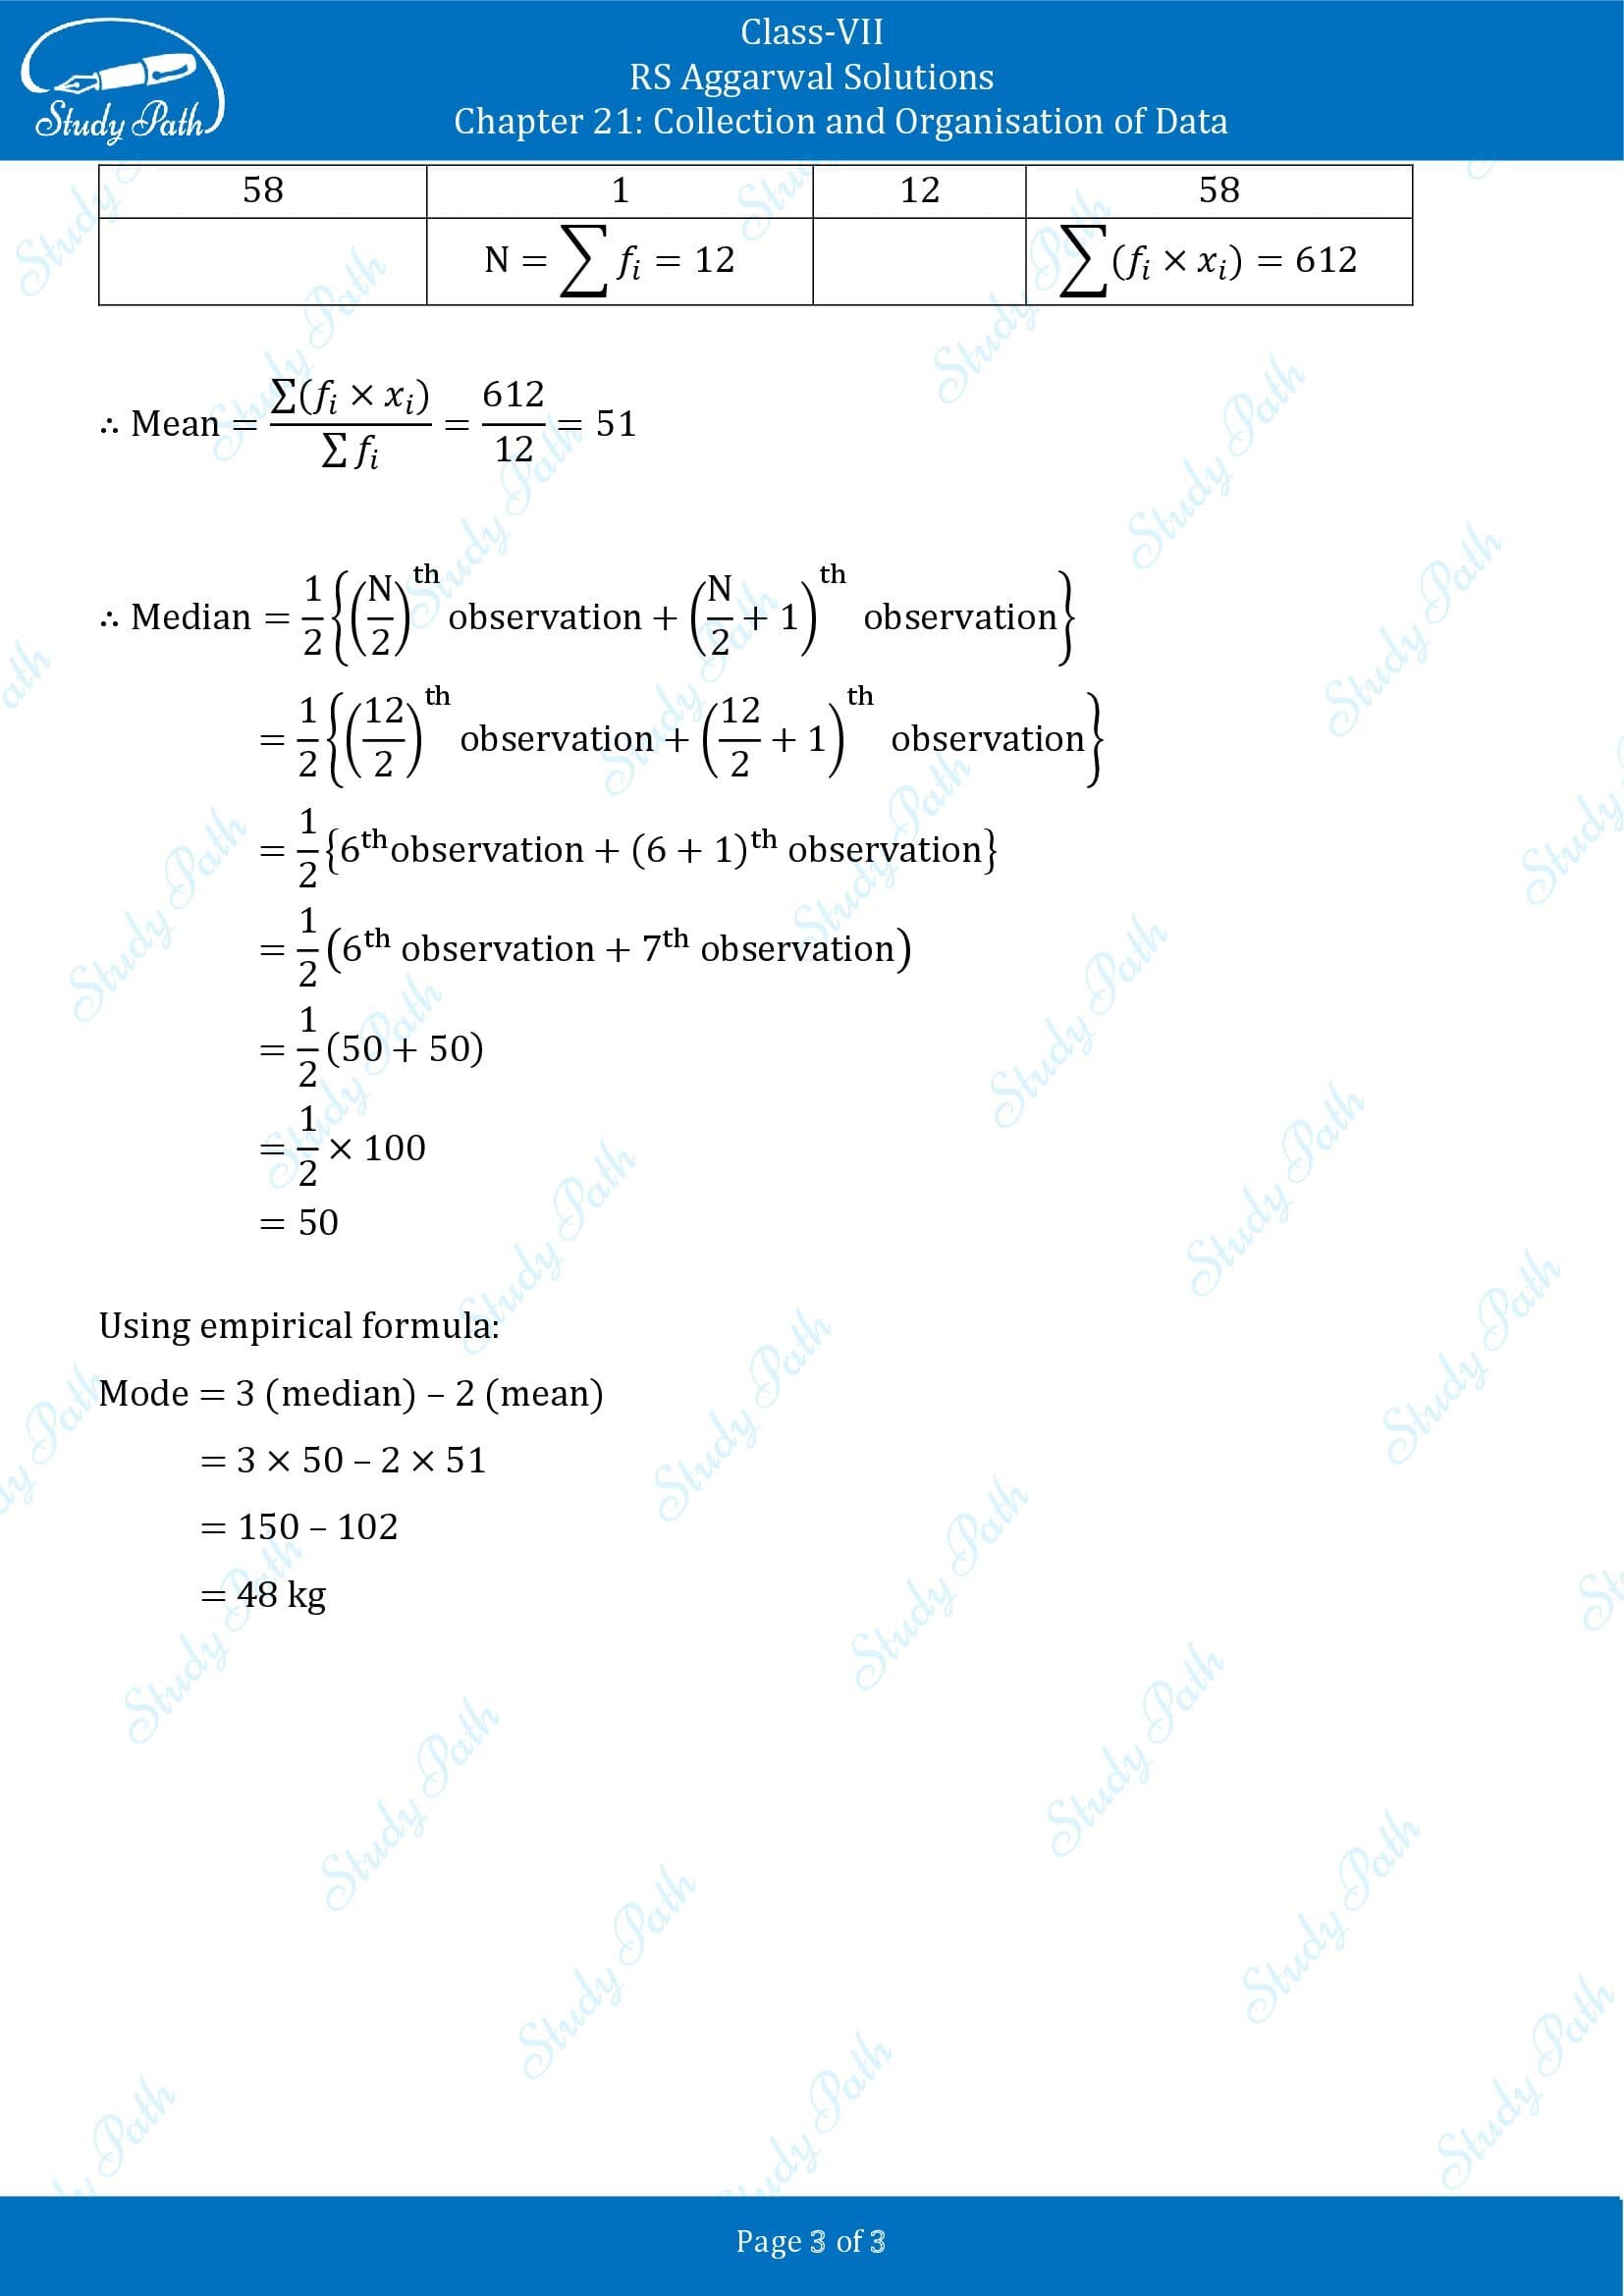 RS Aggarwal Solutions Class 7 Chapter 21 Collection and Organisation of Data Exercise 21C 00003